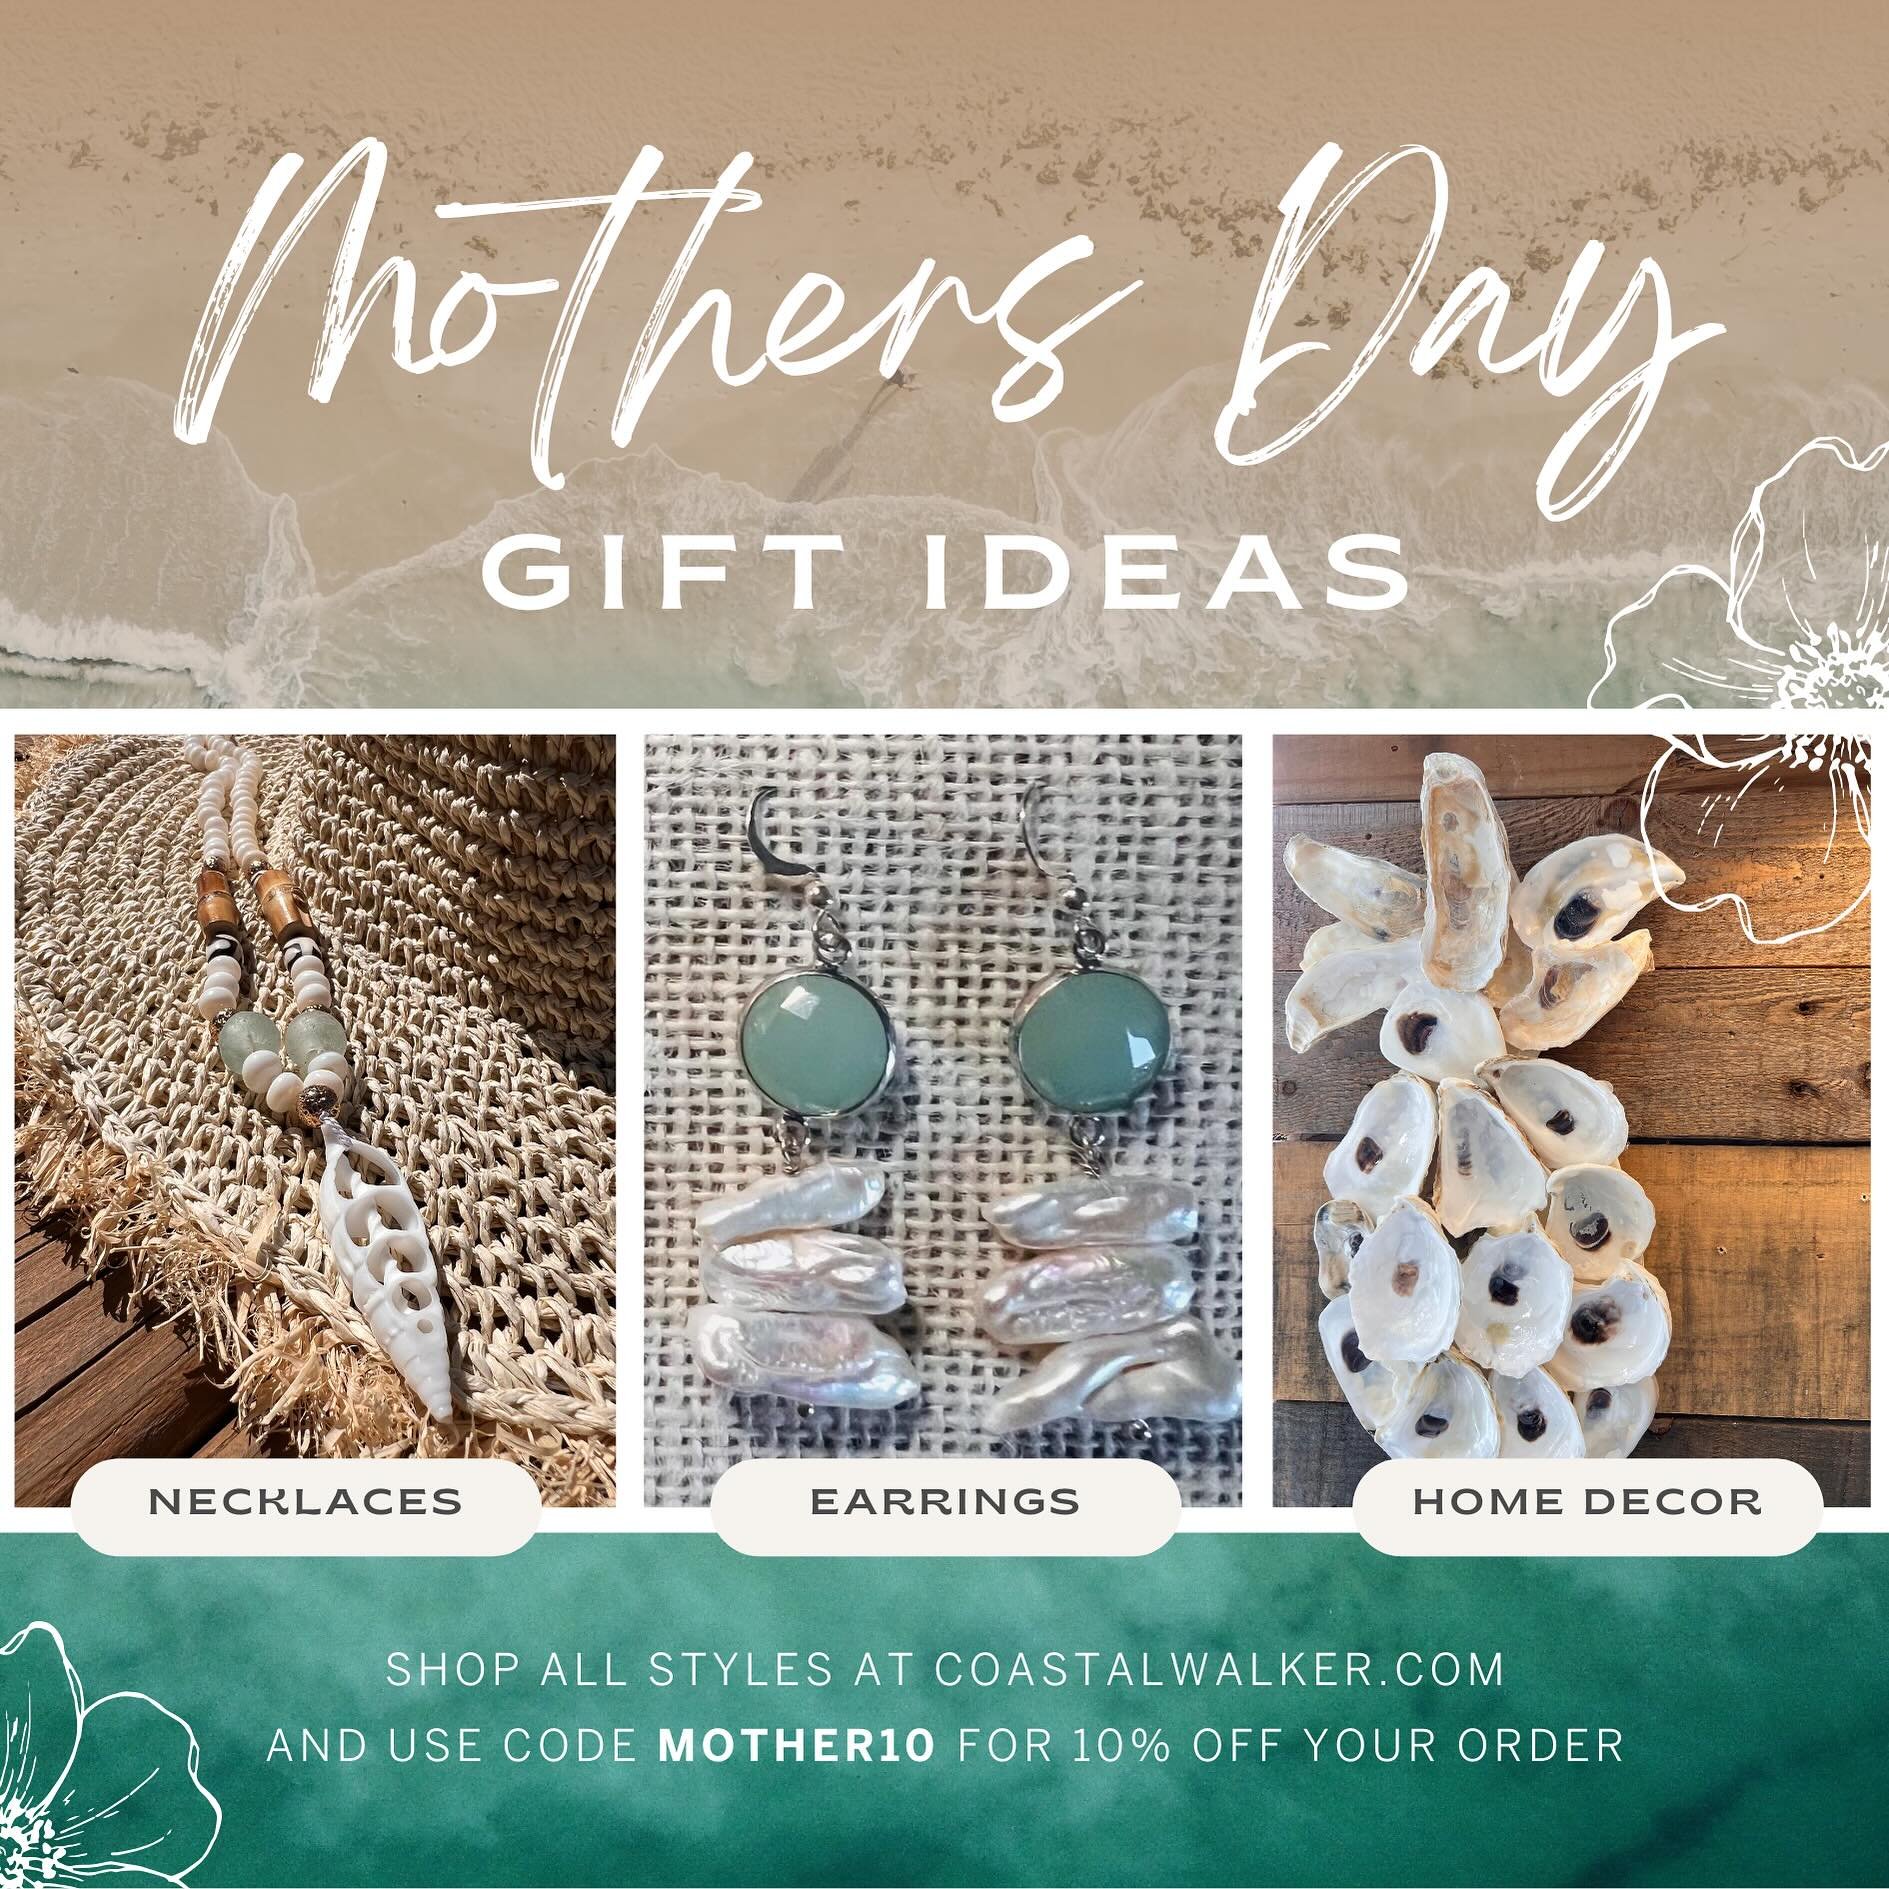 &ldquo;A mother is your first friend, your best friend, your forever friend &ldquo;

✨Celebrate Mom this Mothers Day by treating her to some meaningful gems 

🛍️ Visit our website at the link in BIO and use Code MOTHER10 for a special discount

#hap